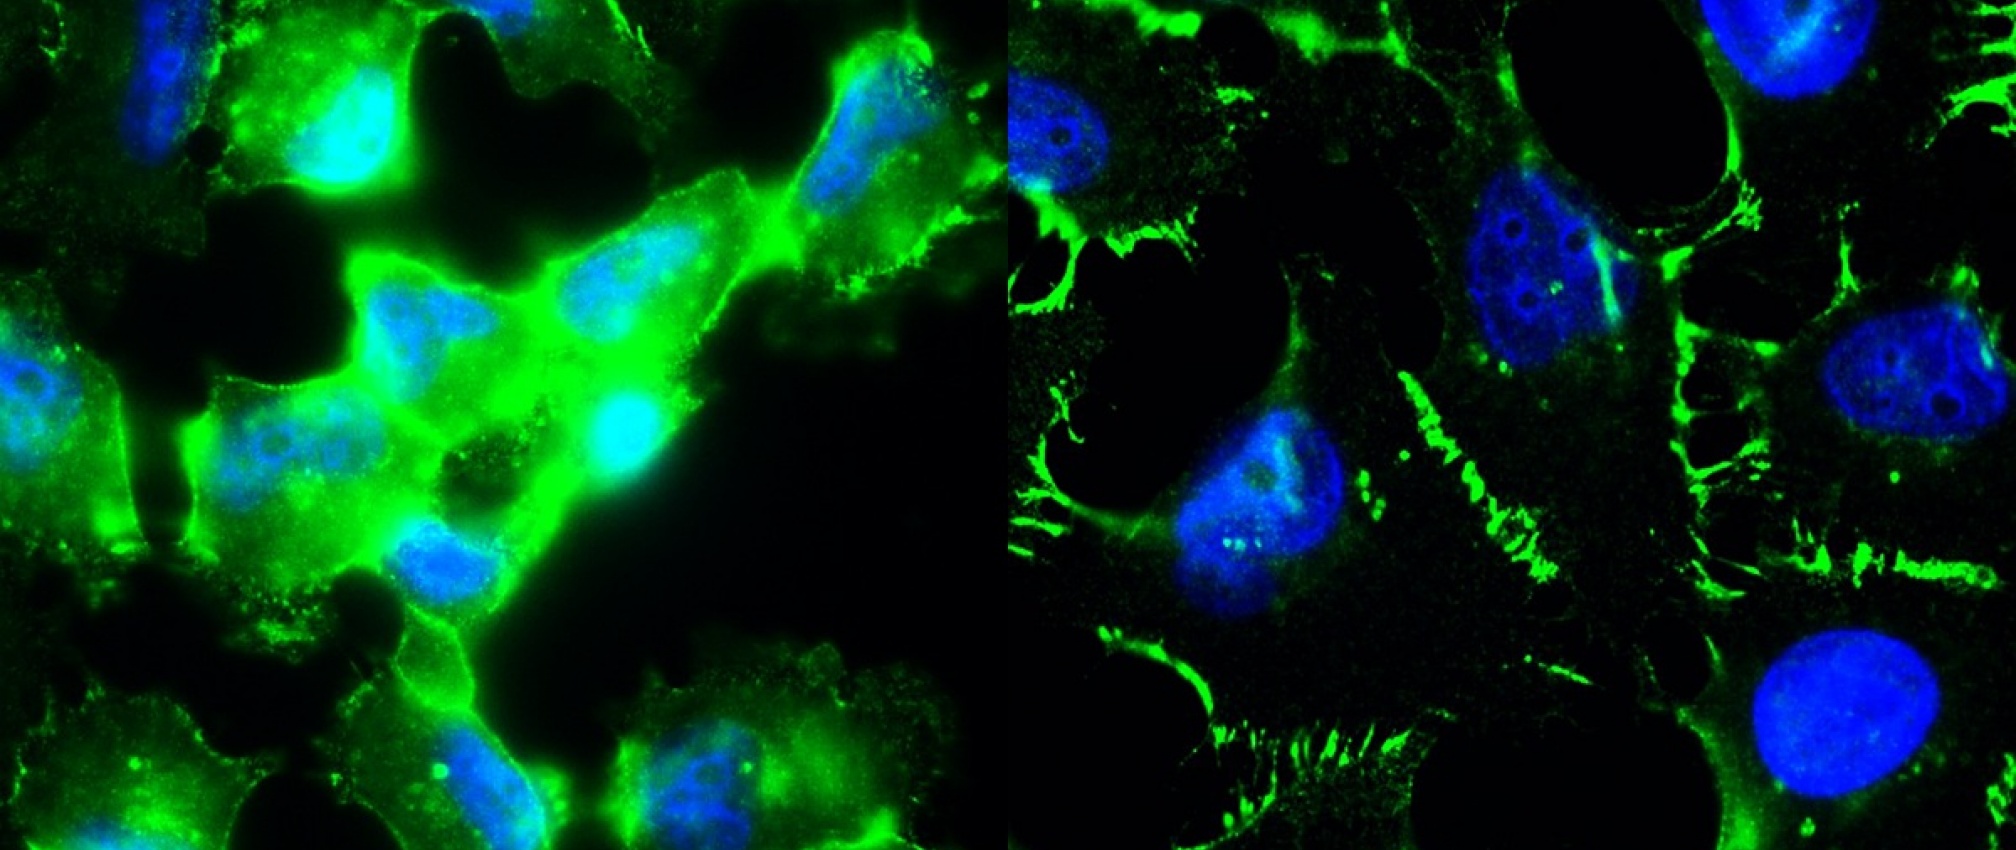 The triple negative breast cancer line, MDA-MD-231, exhibit high levels of beta-catenin staining (left) and elevated Wnt signaling. Incubating MDA-MD-231 cells with an antibody that binds the Wnt coreceptor, LRP6, dramatically decreases cytoplasmic beta-catenin staining and promotes beta-catenin localization to the cell junctions (right). Green is beta-catenin and blue is DNA.